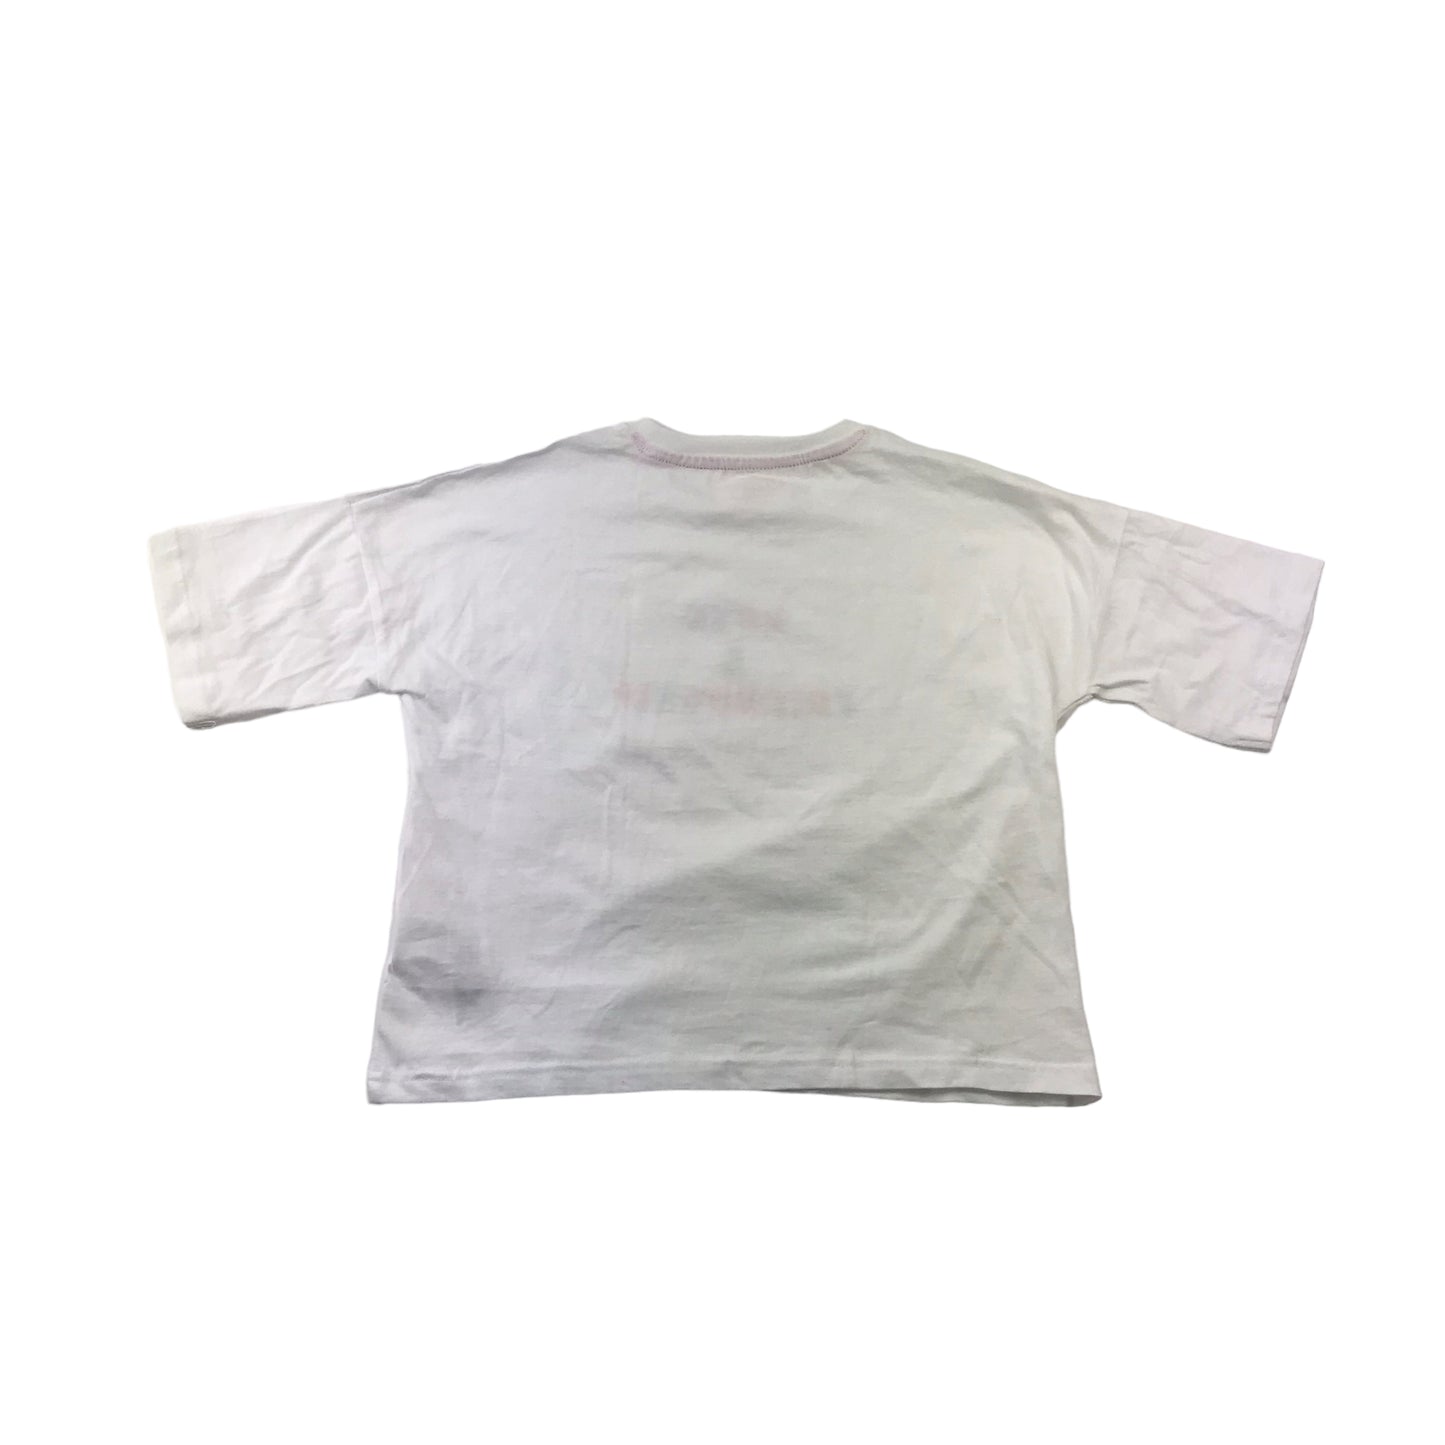 Primark White Embroidery Text T-Shirt Age 10